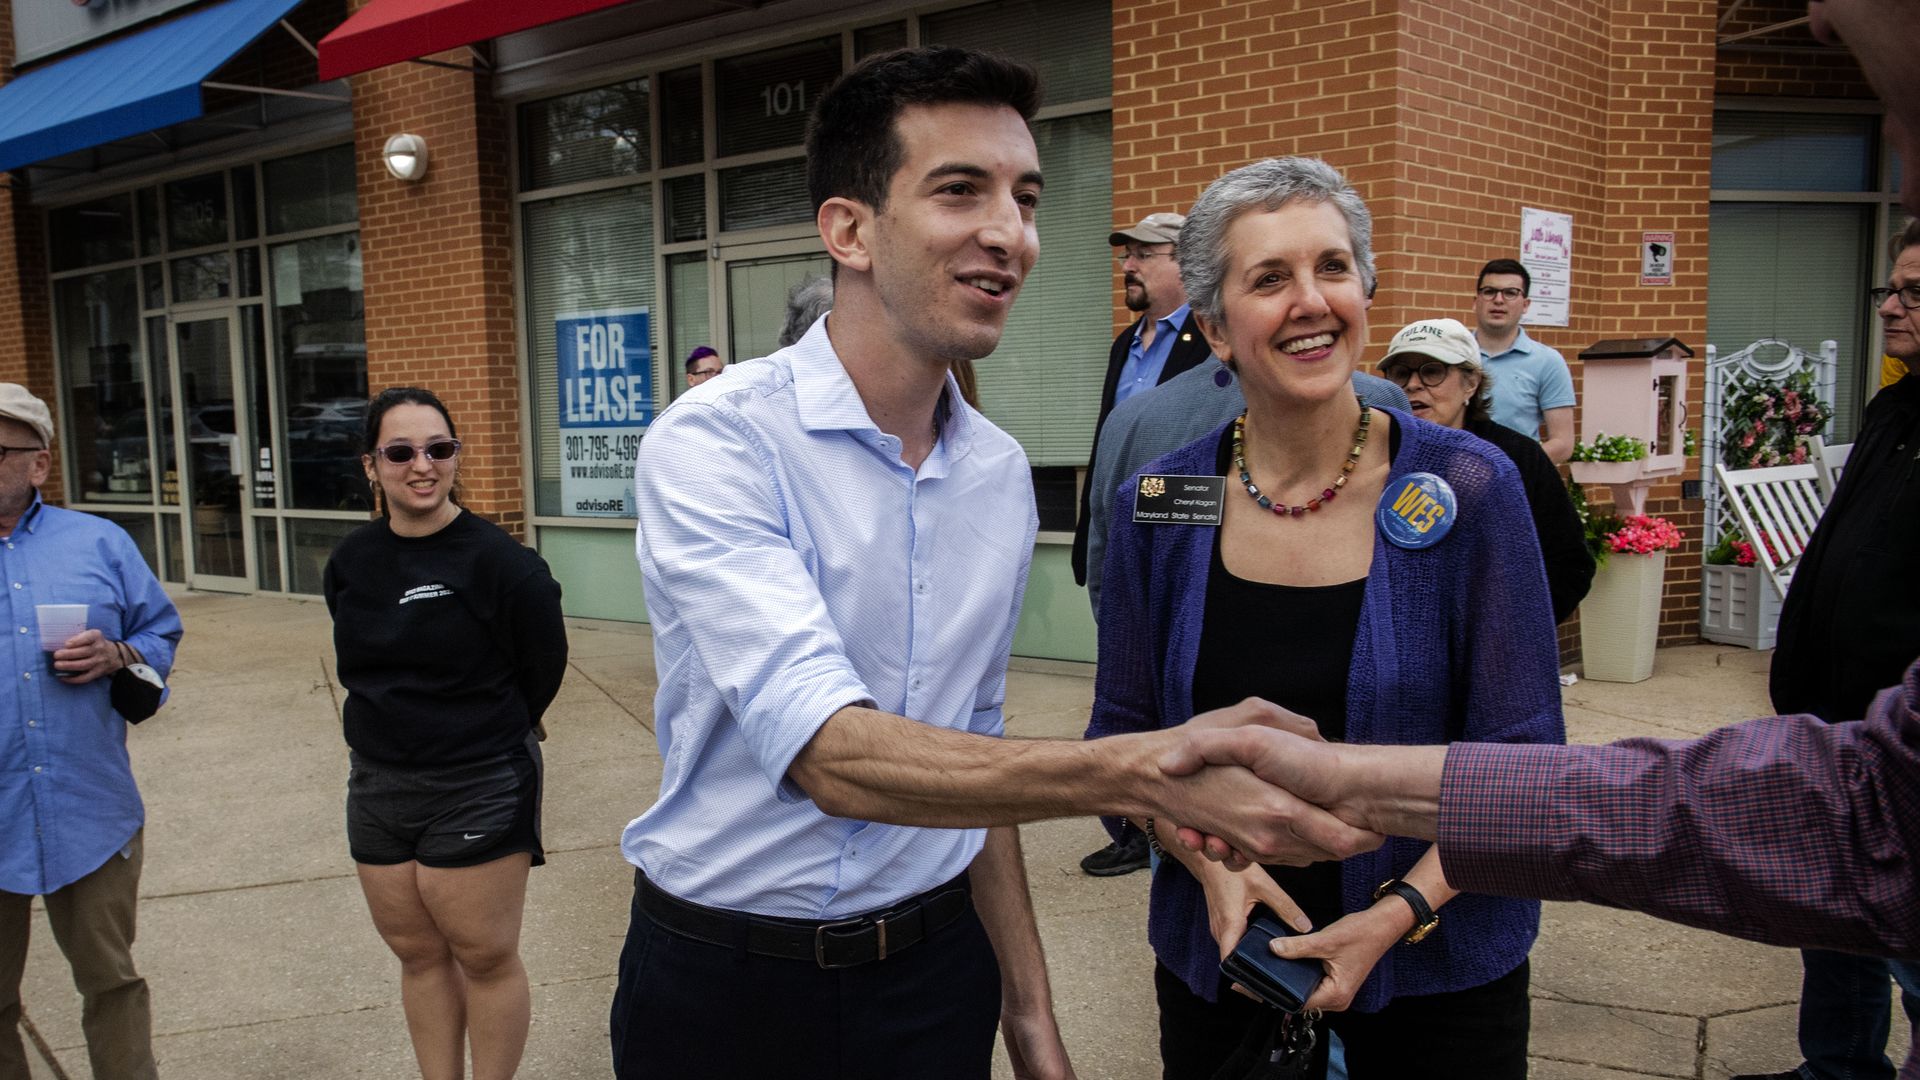 Joe Vogel, a then 24-year-old gay Latino candidate for the Maryland House, greets supporters at a rally in Gaithersburg, Maryland, inm April 2022. 